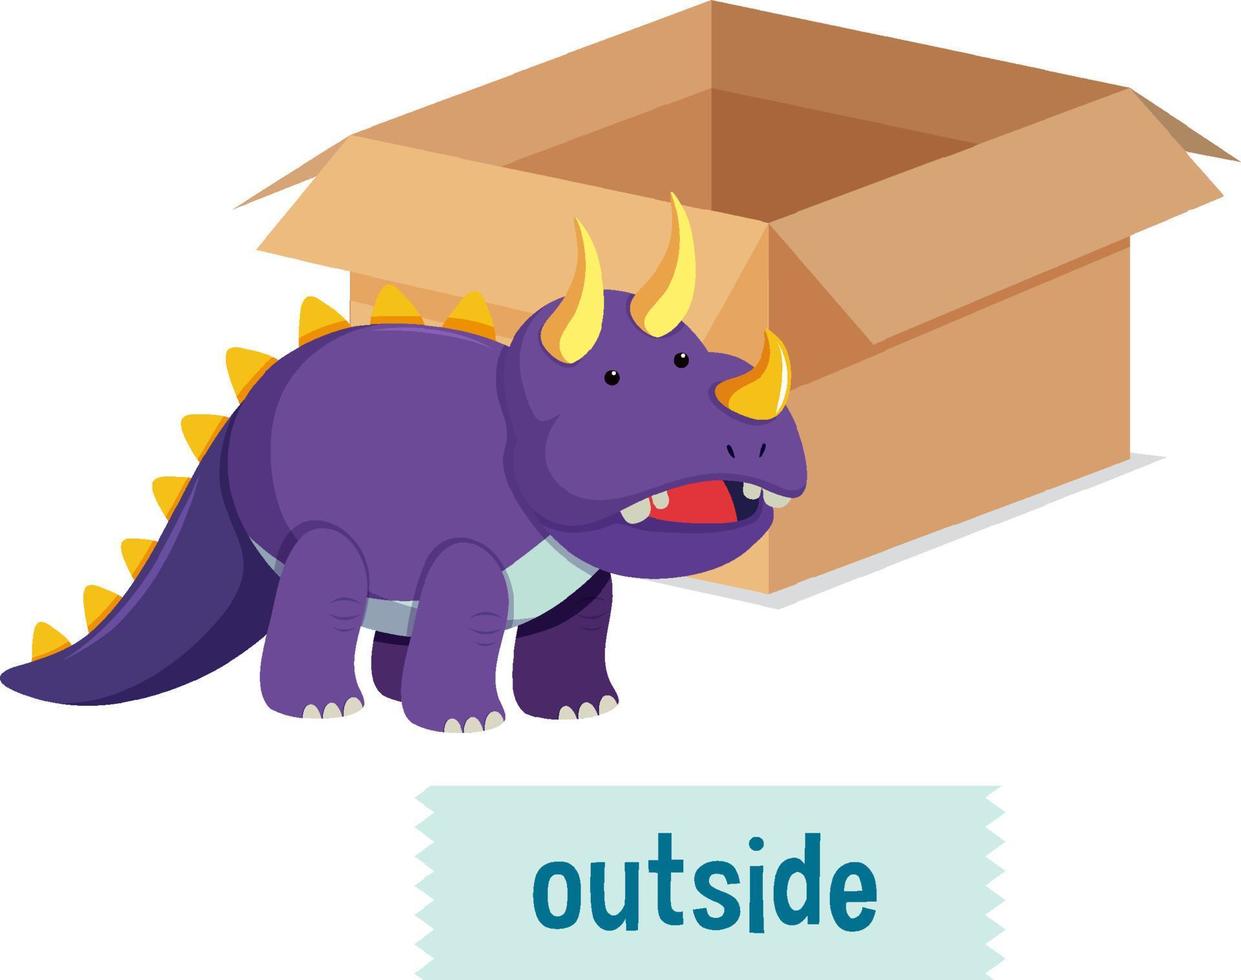 Preposition of place with cartoon dinosaur and a box vector